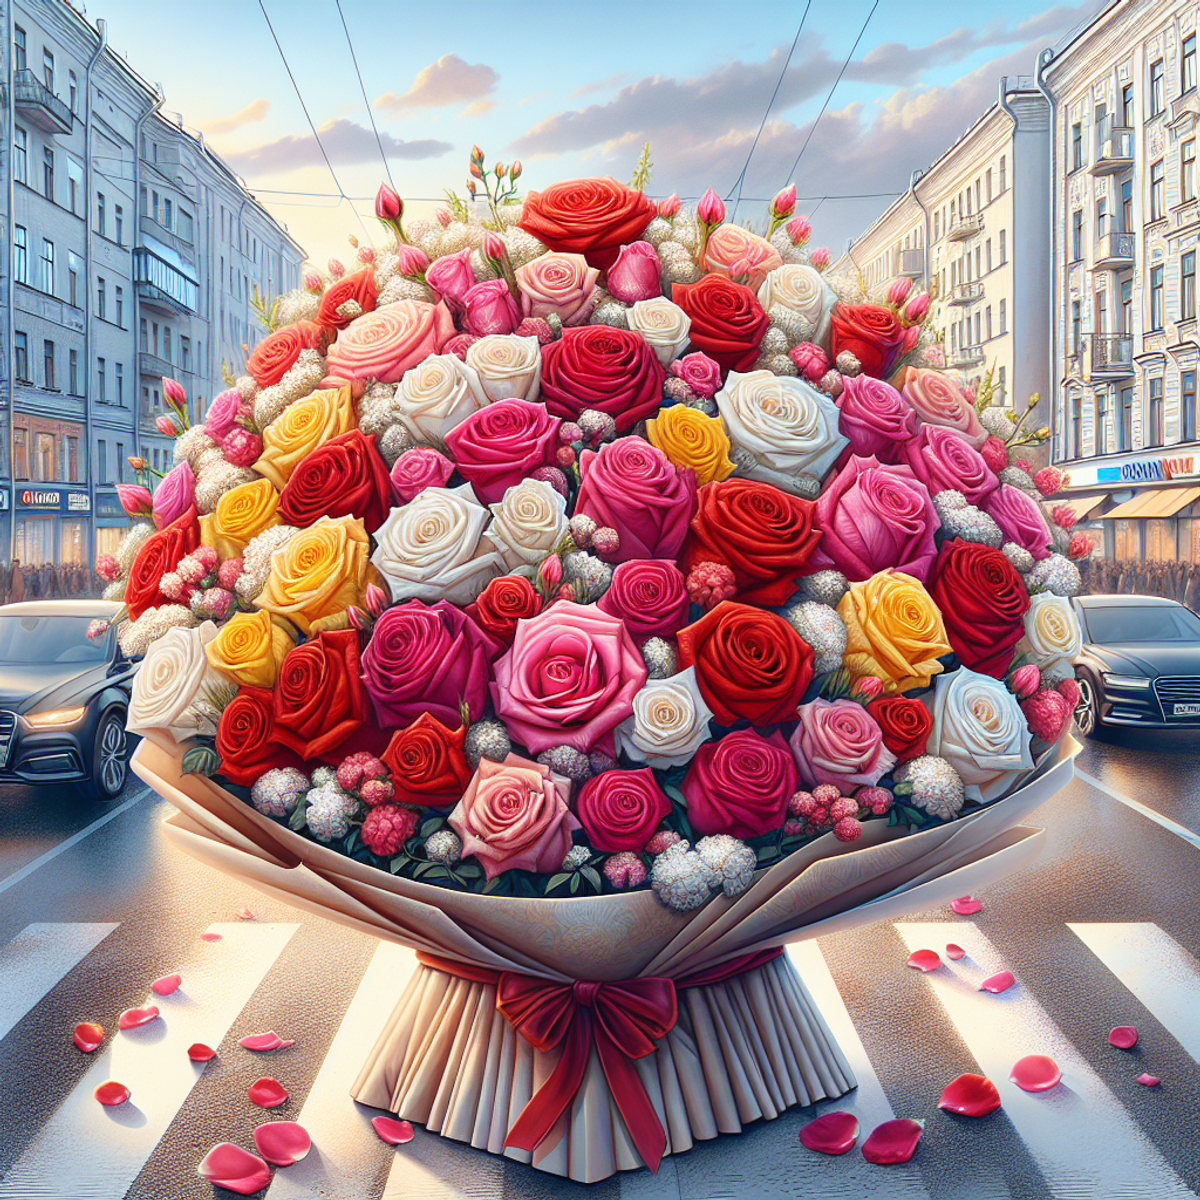 A bouquet of 101 roses in a vibrant city environment.